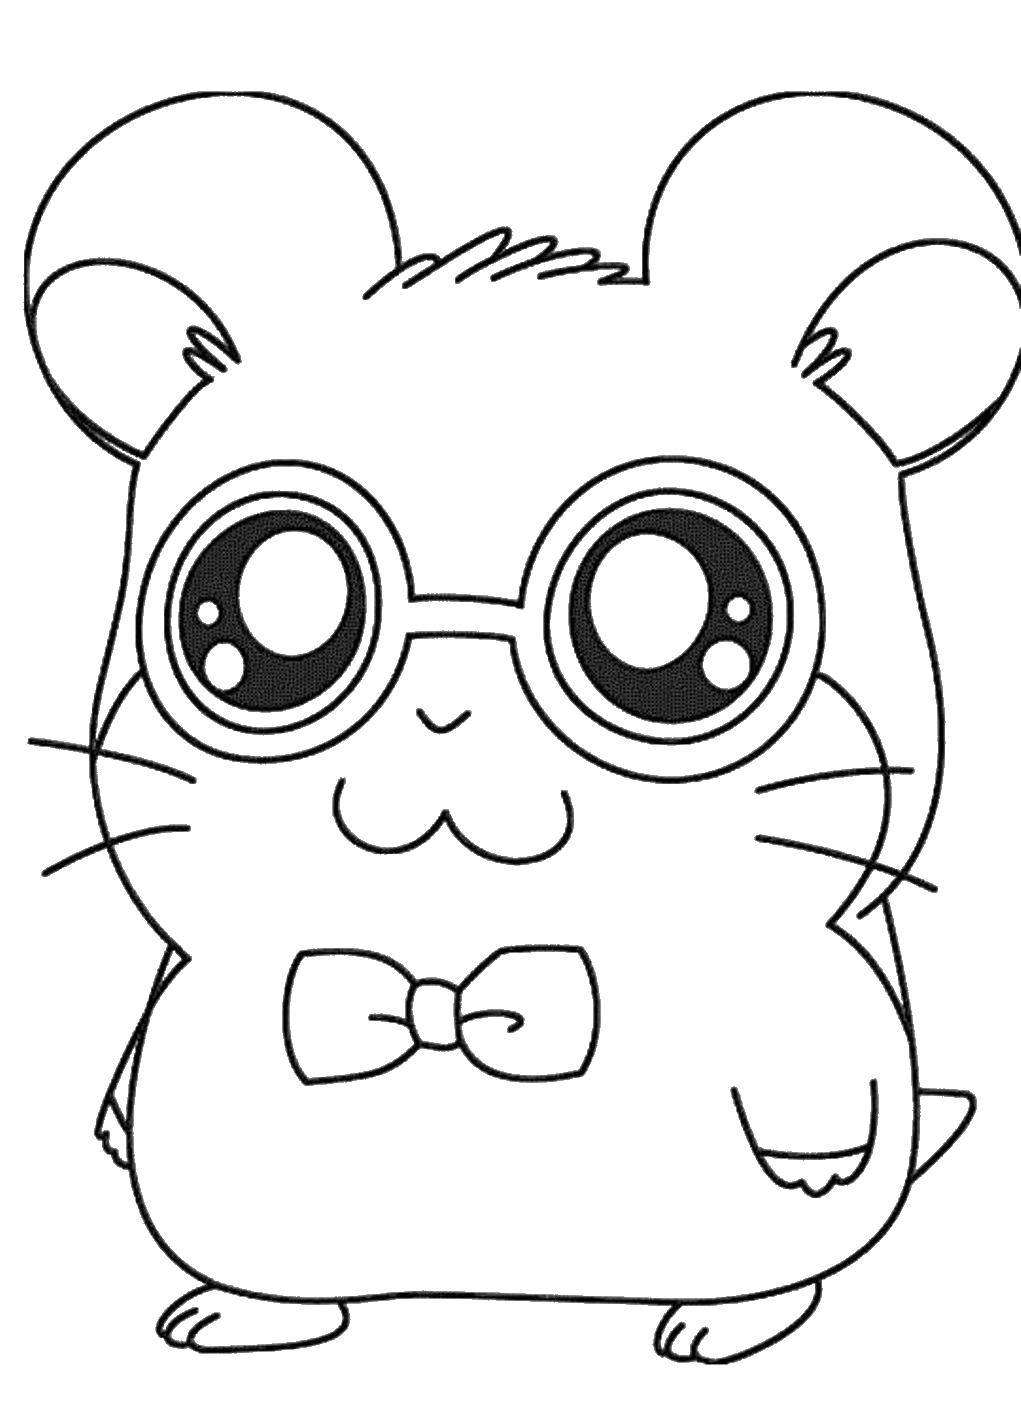 Coloring Mouse from the anime. Category cartoons. Tags:  Animals, mouse.